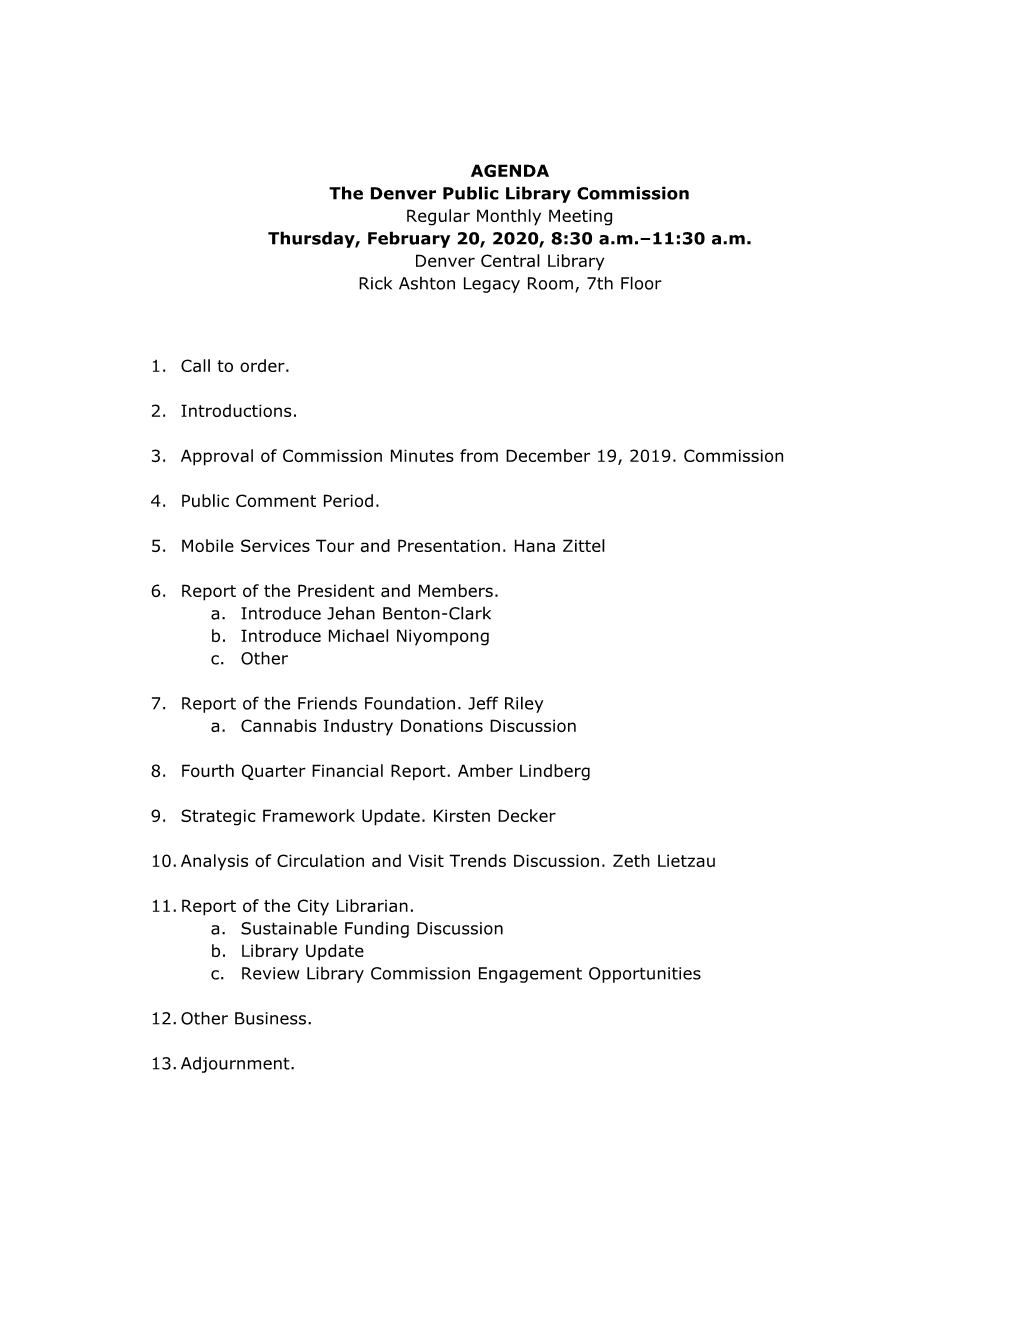 AGENDA the Denver Public Library Commission Regular Monthly Meeting Thursday, February 20, 2020, 8:30 A.M.–11:30 A.M